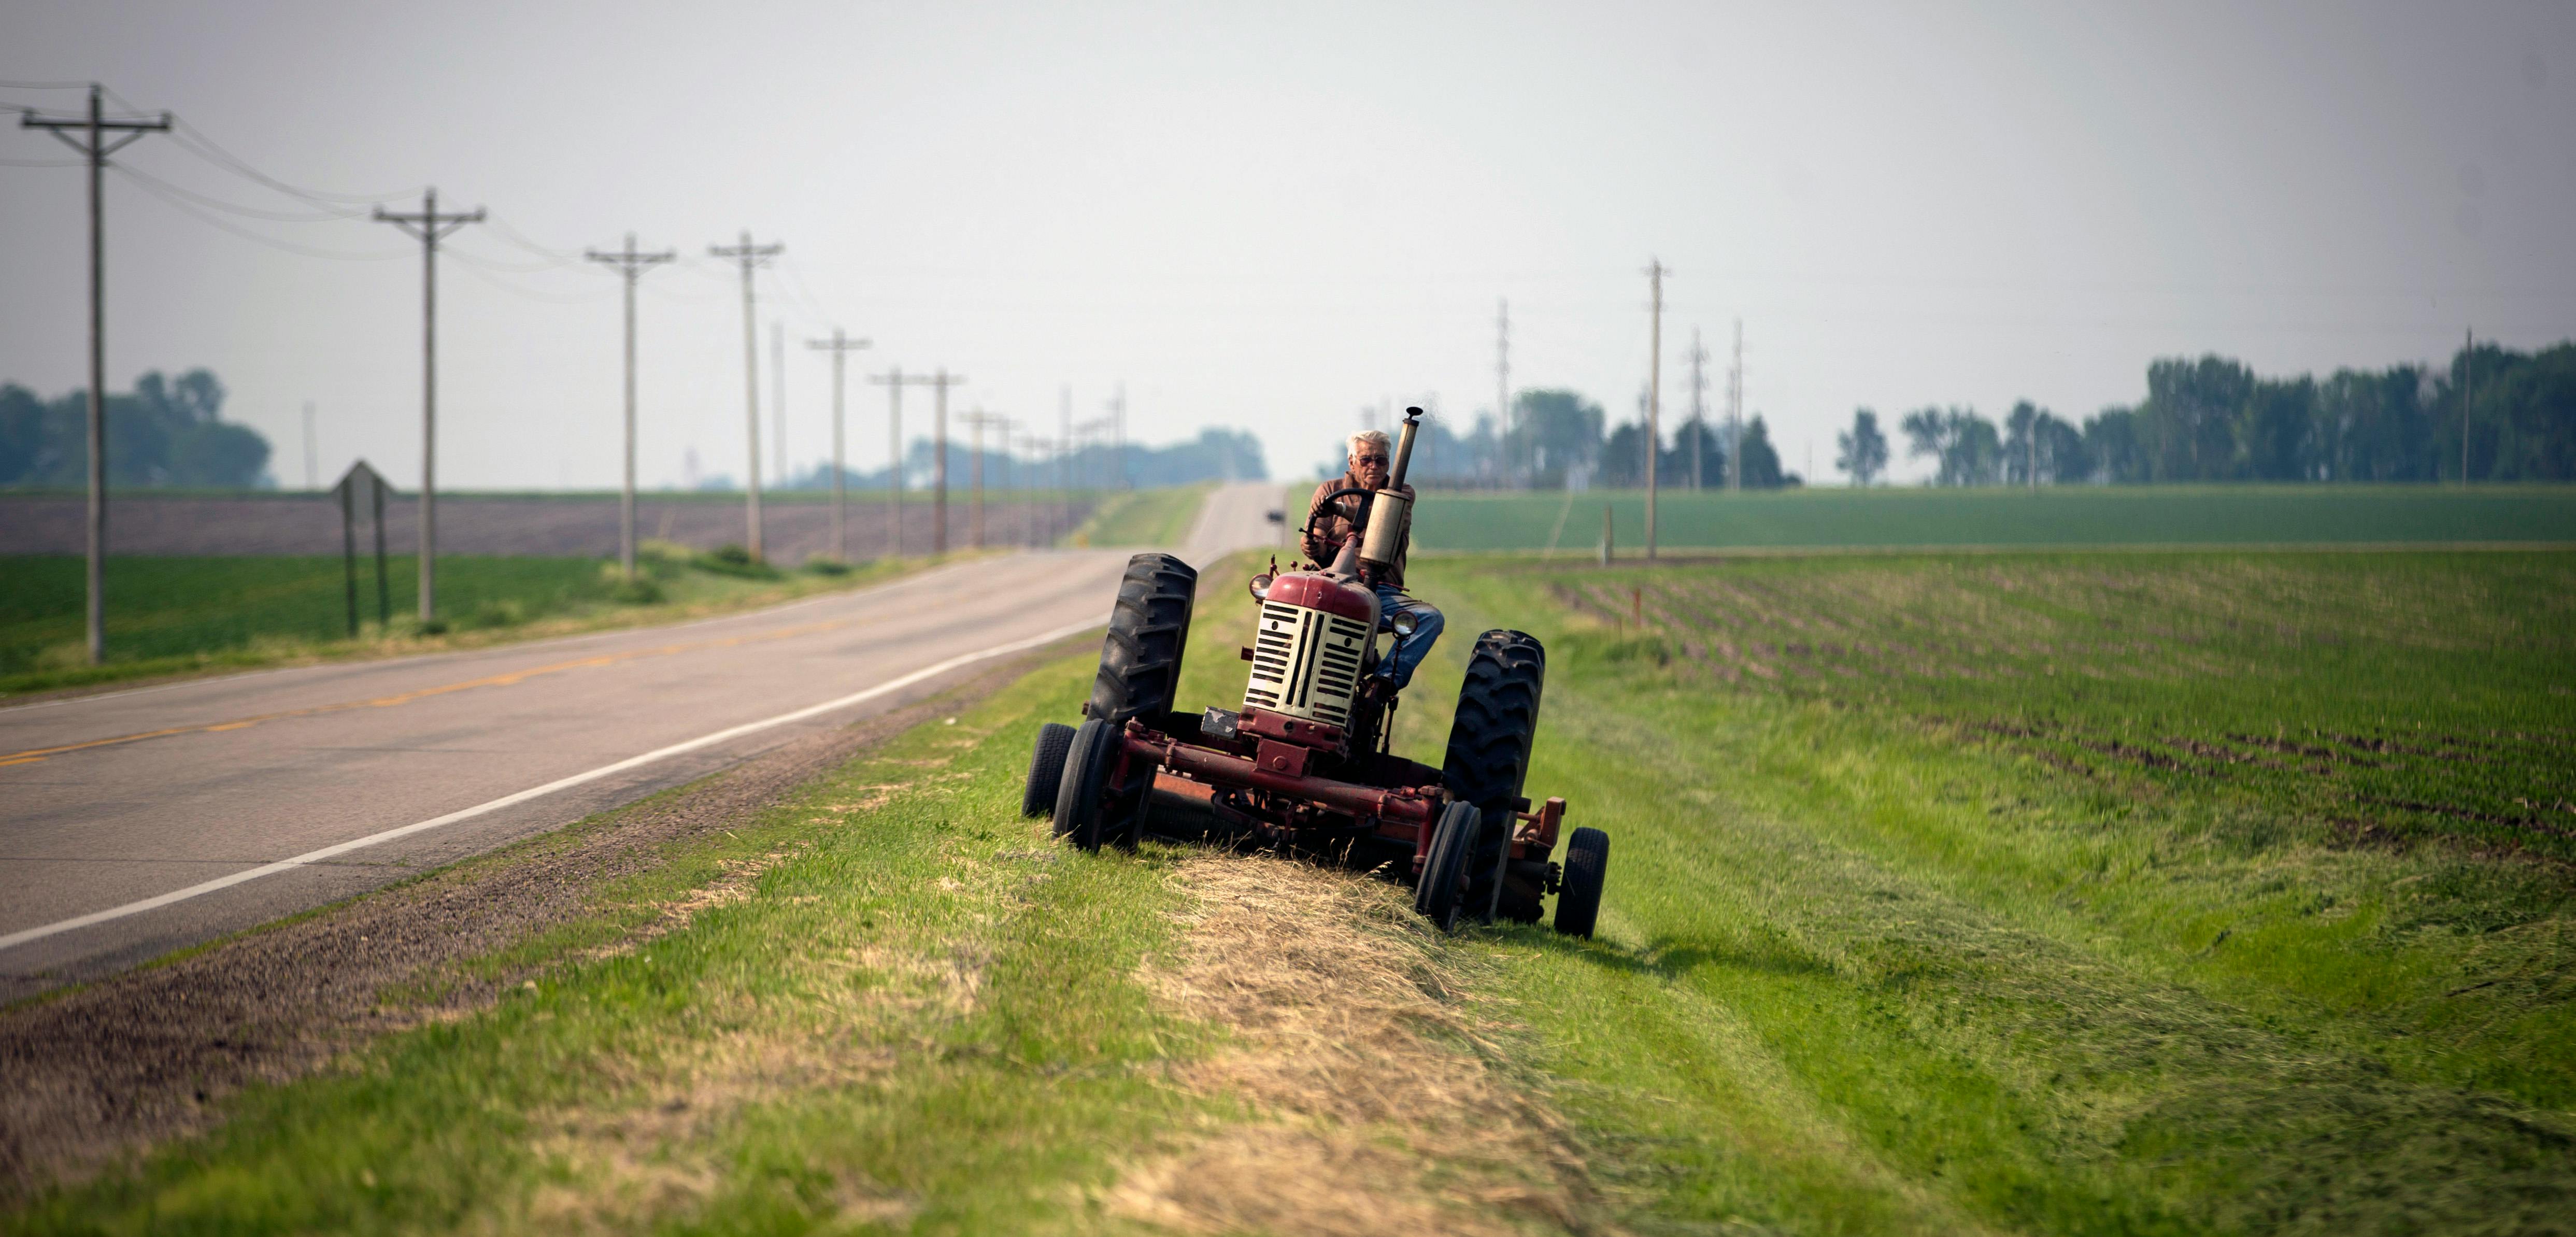 A farmer mowed the ditch around his crops near New Richland, Minn., on an old tractor. The U.S. doesn't require safety updates, even though rollover protection would greatly reduce the danger posed by vintage machines.